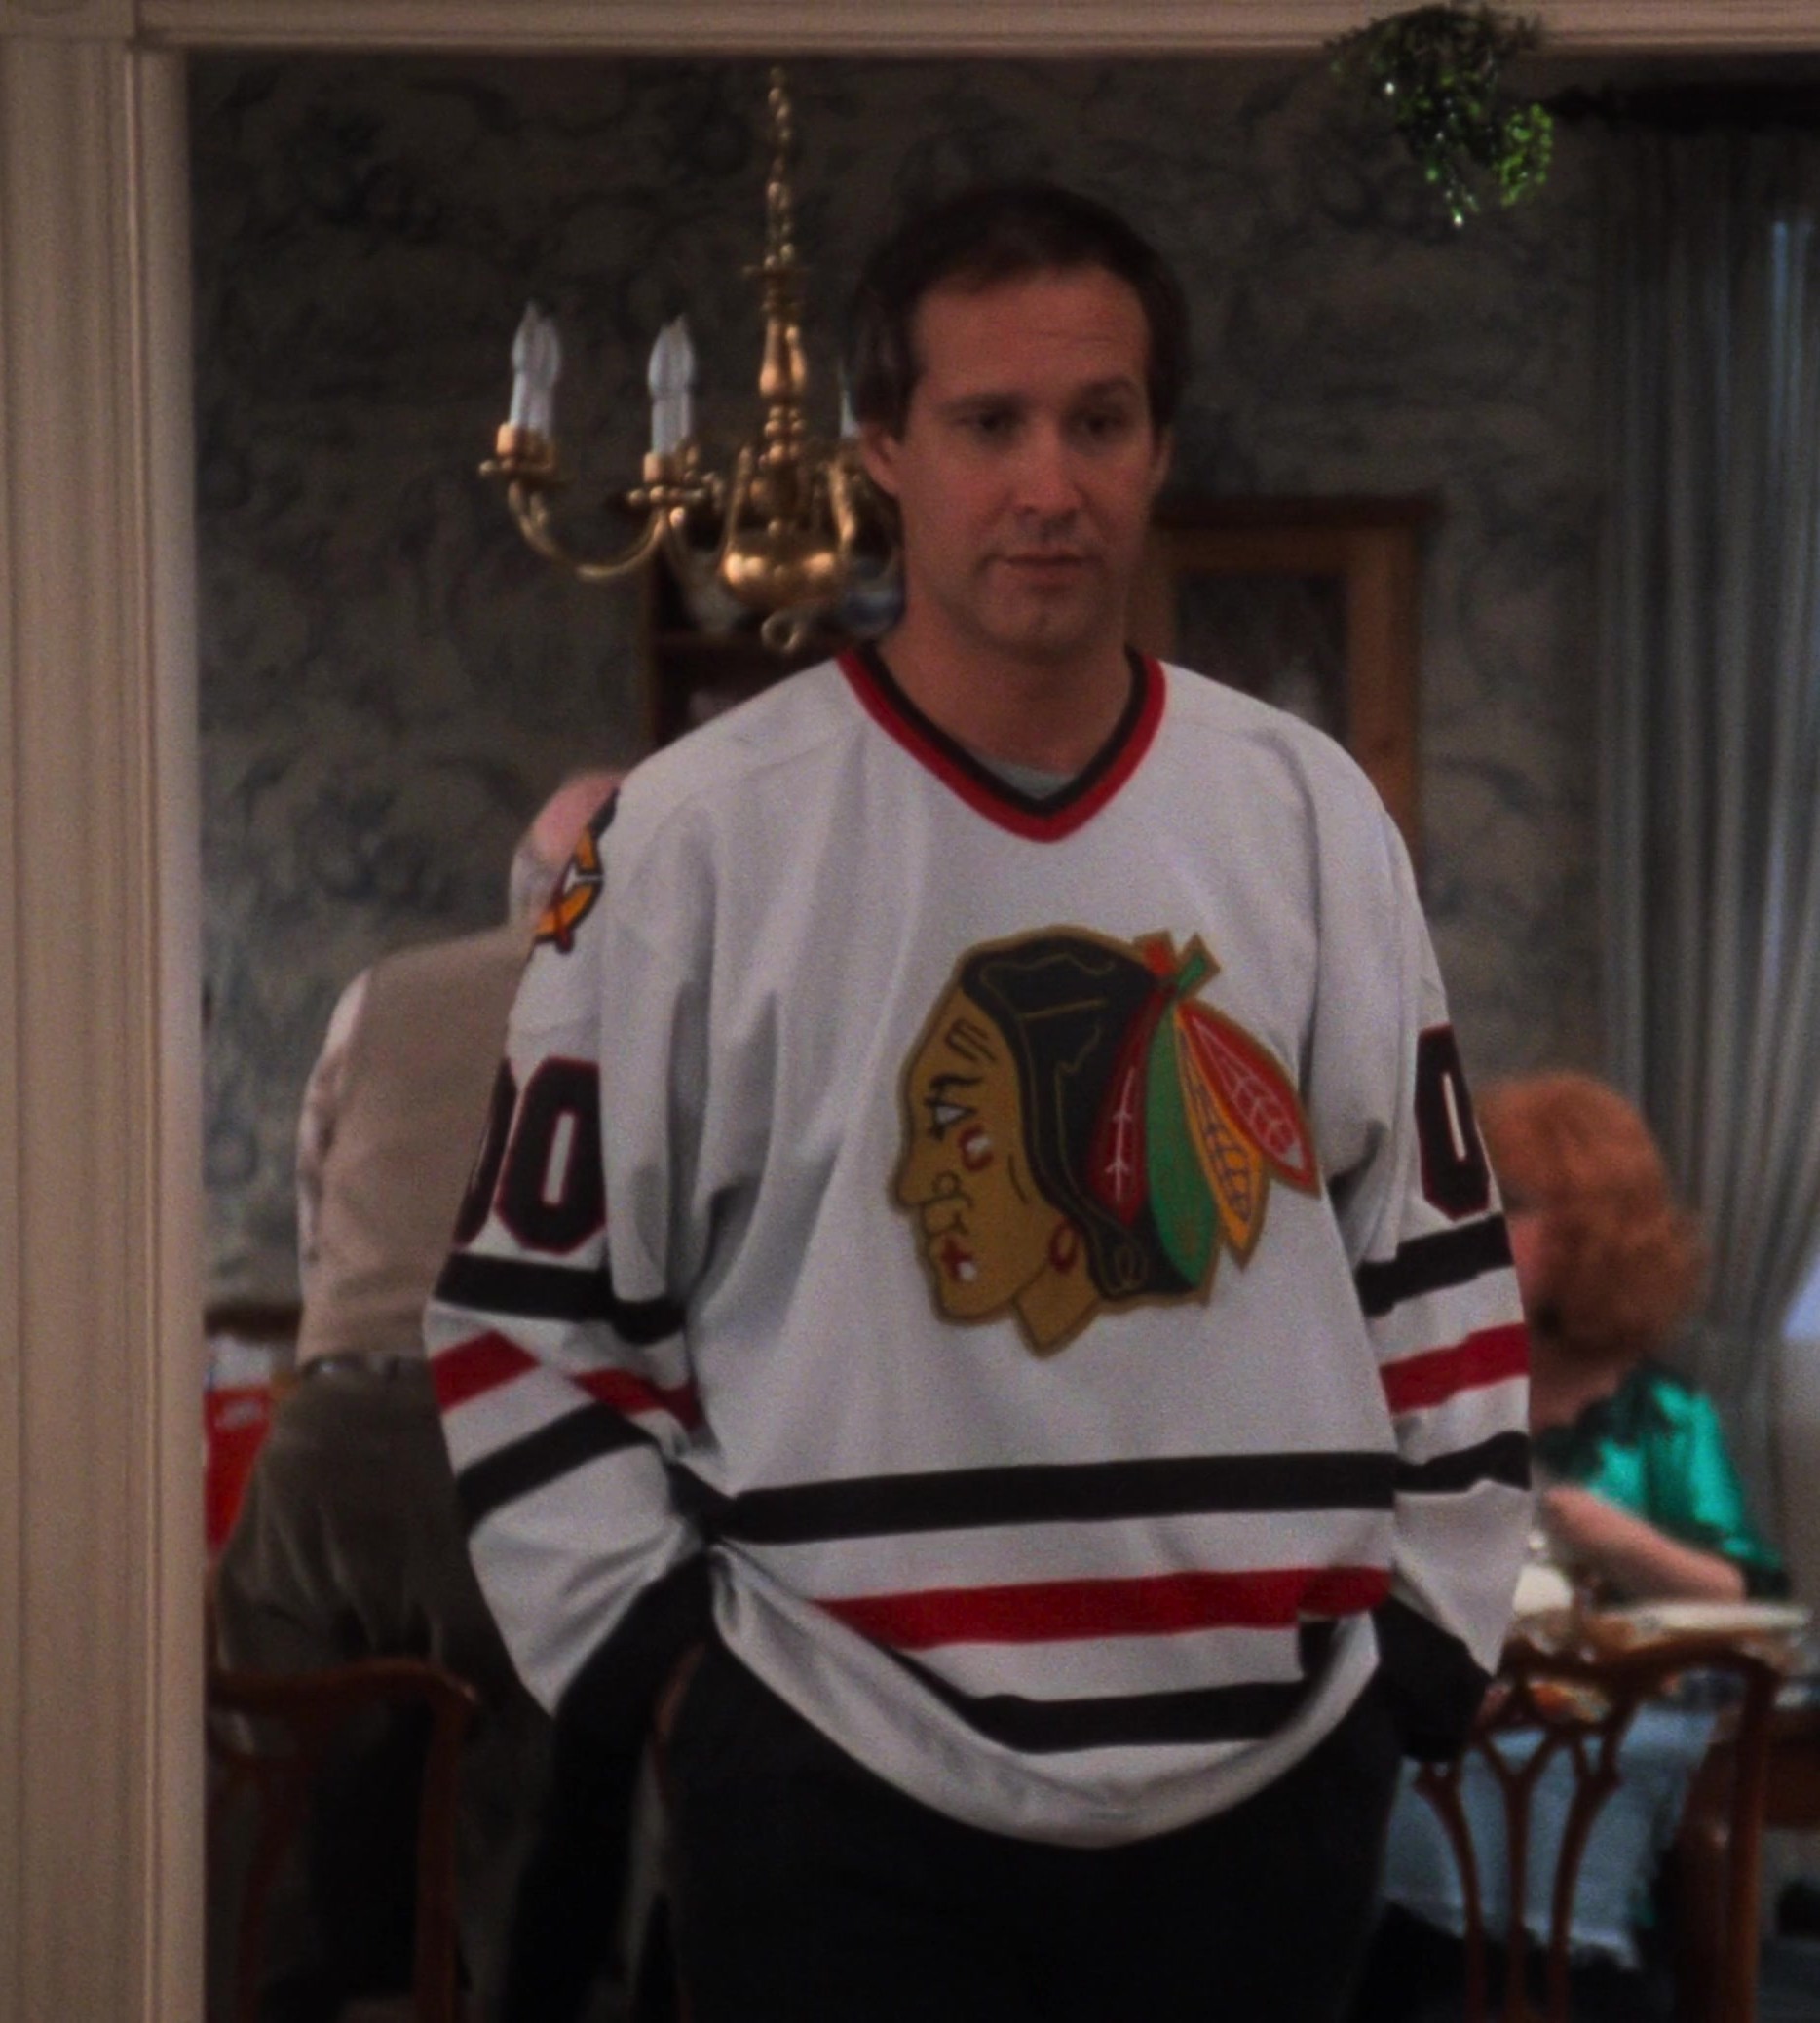 Worn on National Lampoon's Christmas Vacation (1989) Movie - Chicago Blackhawks Ice Hockey Team Worn by Chevy Chase as Clark W. "Sparky" Griswold Jr.